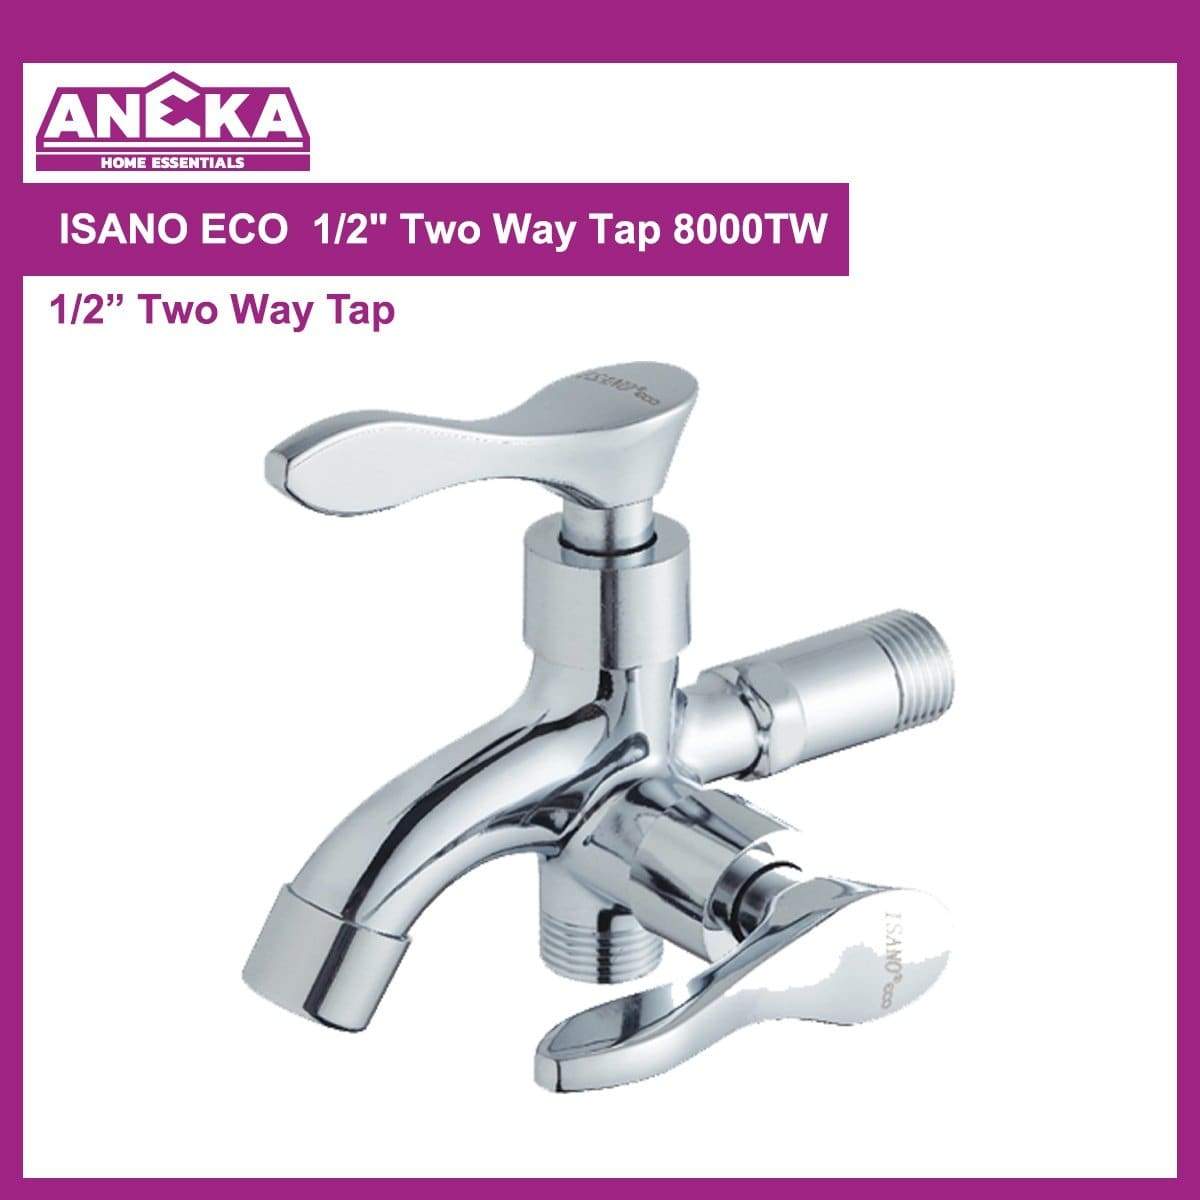 ISANO ECO 1/2" Two Way Tap 8000TW